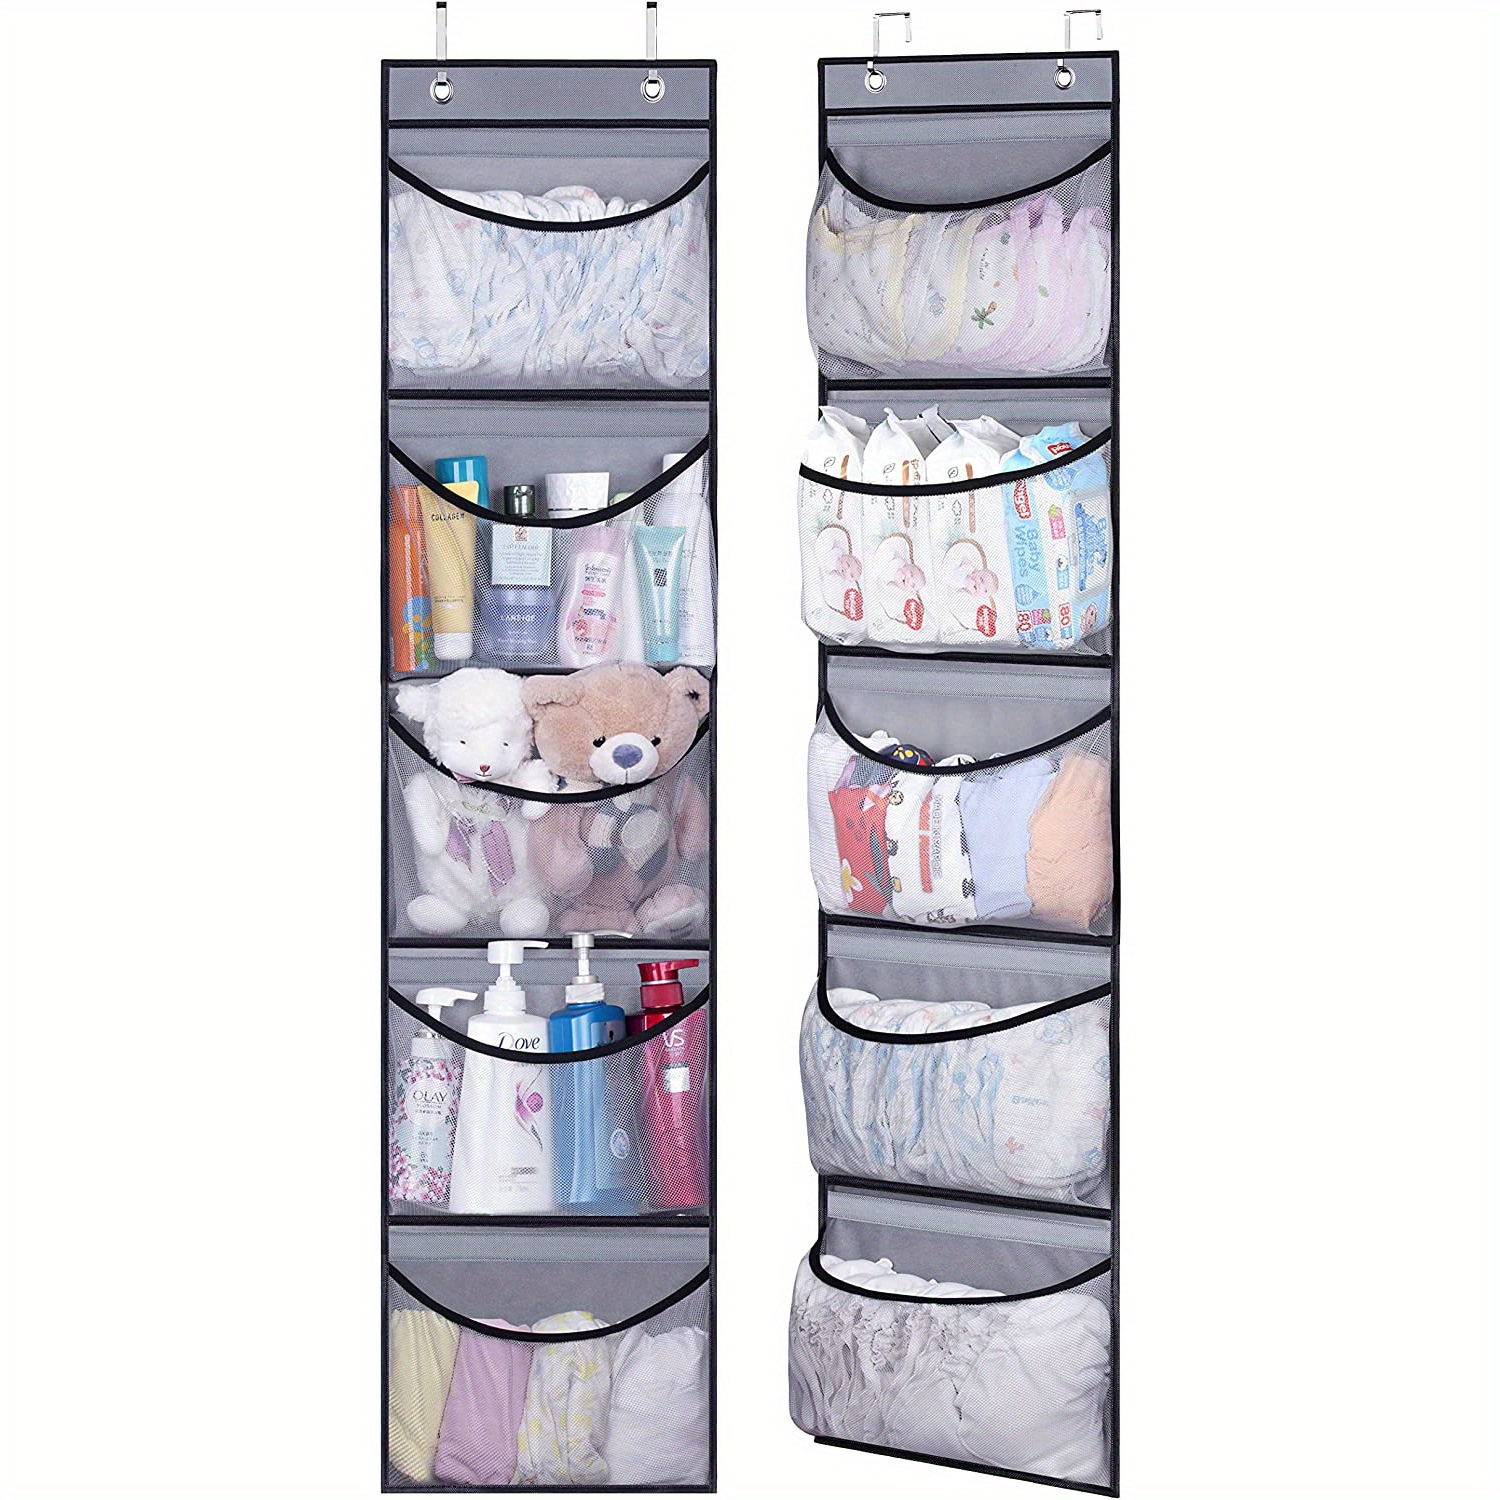 

5-layer Over-the-door Organizer - Large Hanging Storage Bag For Toys, Clothes & Sundries - Durable Non-woven Fabric With Lining Board Clothes Organizer Storage Hangers For Clothes